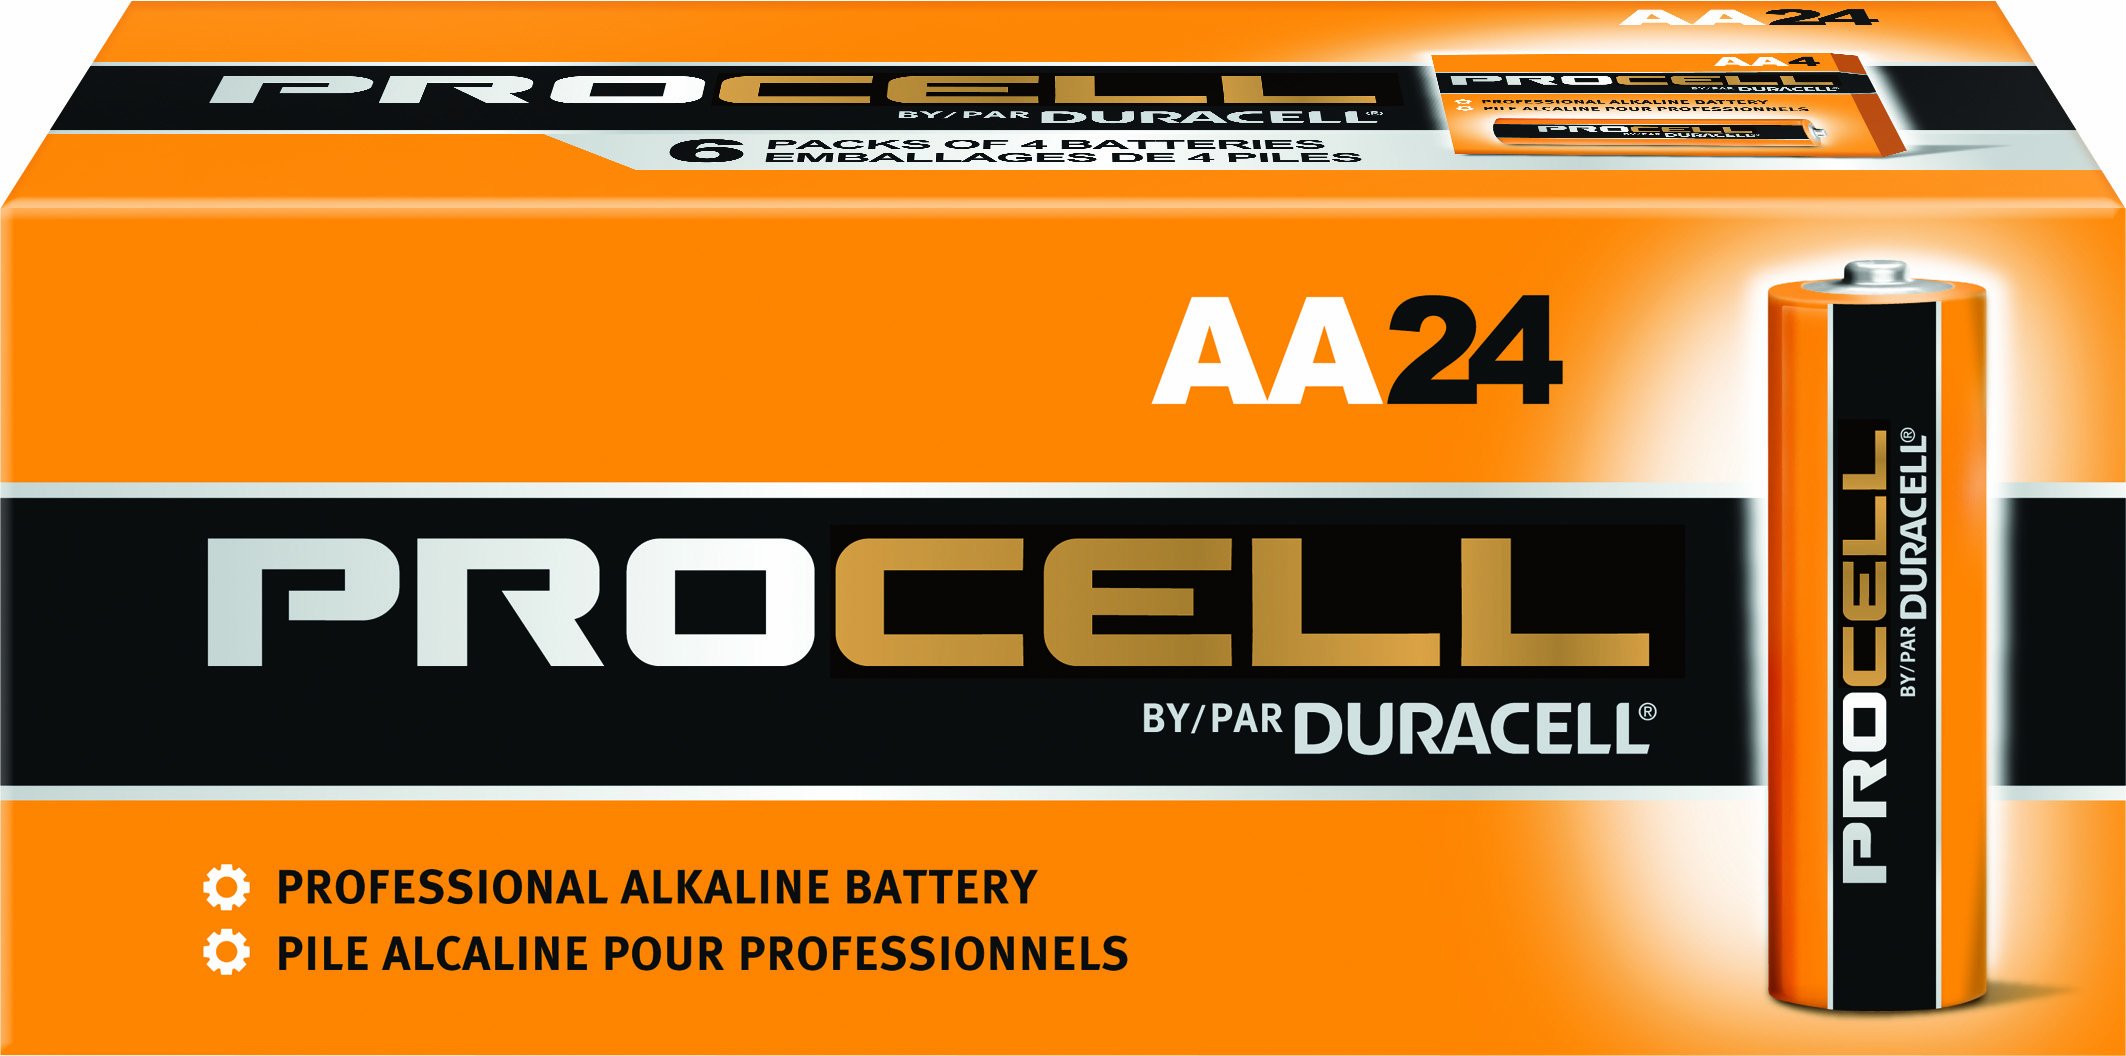 Duracell PC1500BKD09 Procell Alkaline-Manganese Dioxide Battery, AA Size, 1.5V (Pack of 24)